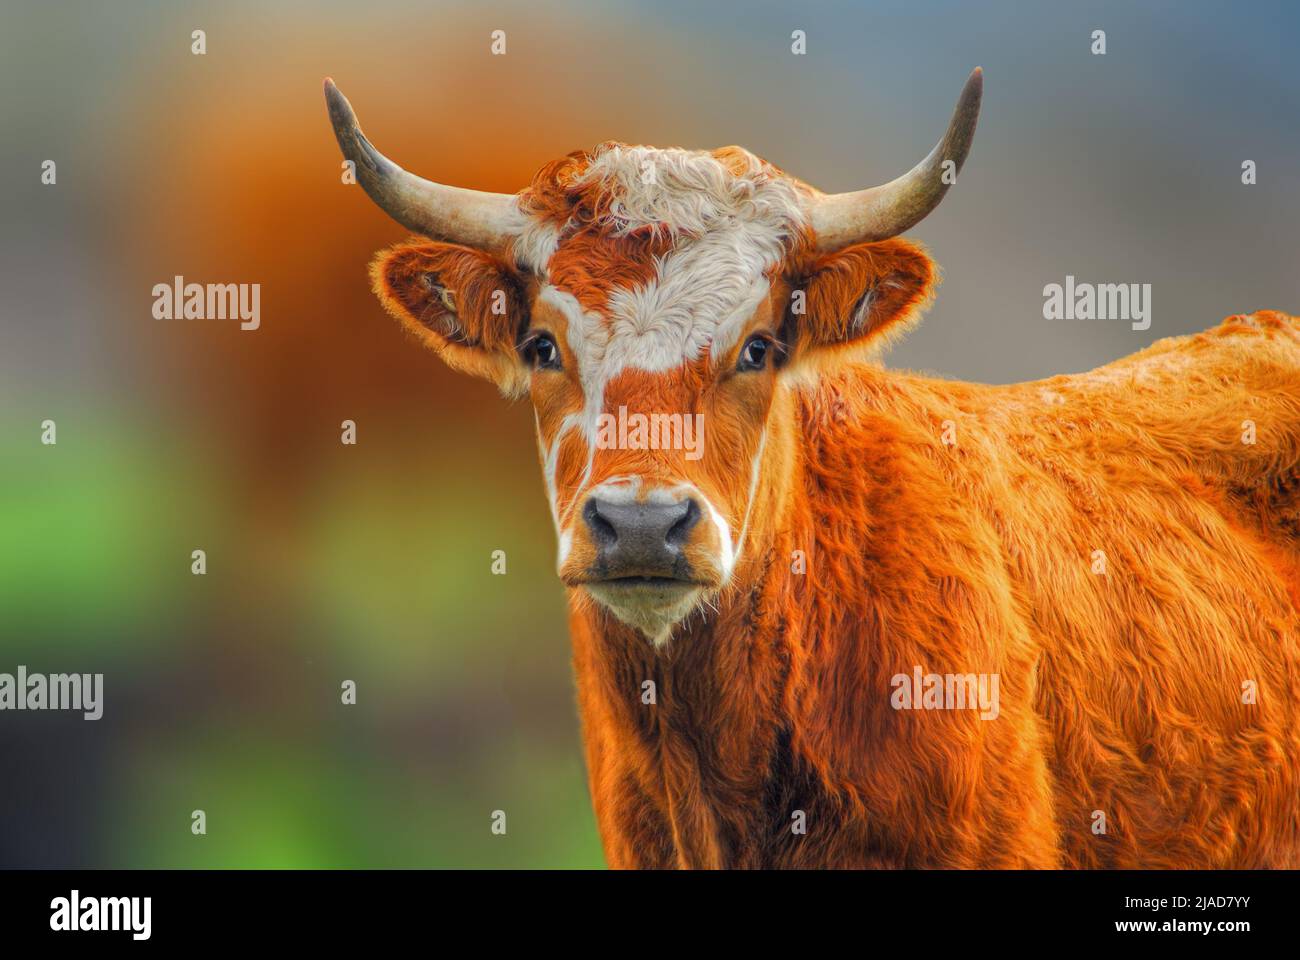 Portrait of a red and white Ayrshire dairy cow, Australia Stock Photo